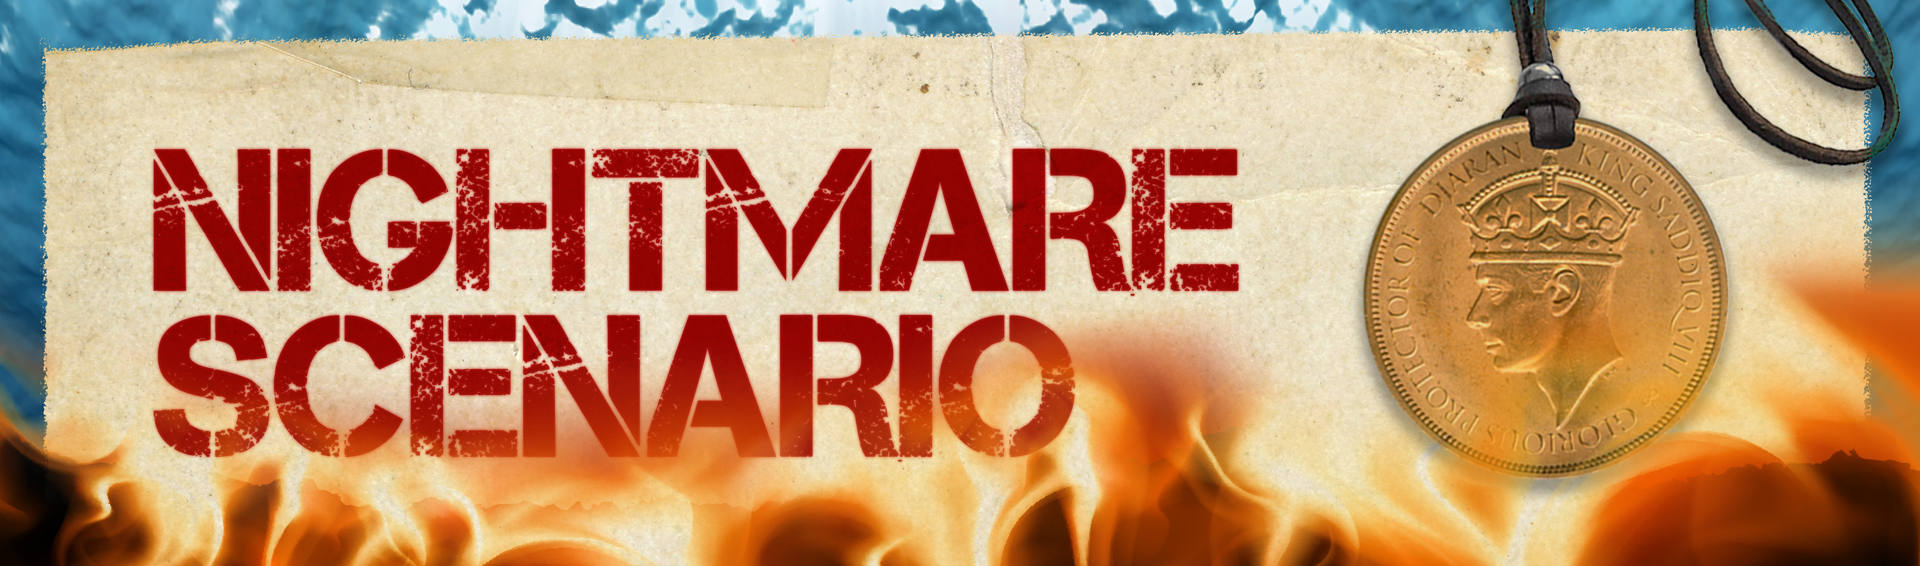 Red Nightmare Scenario Wording on a flaming background